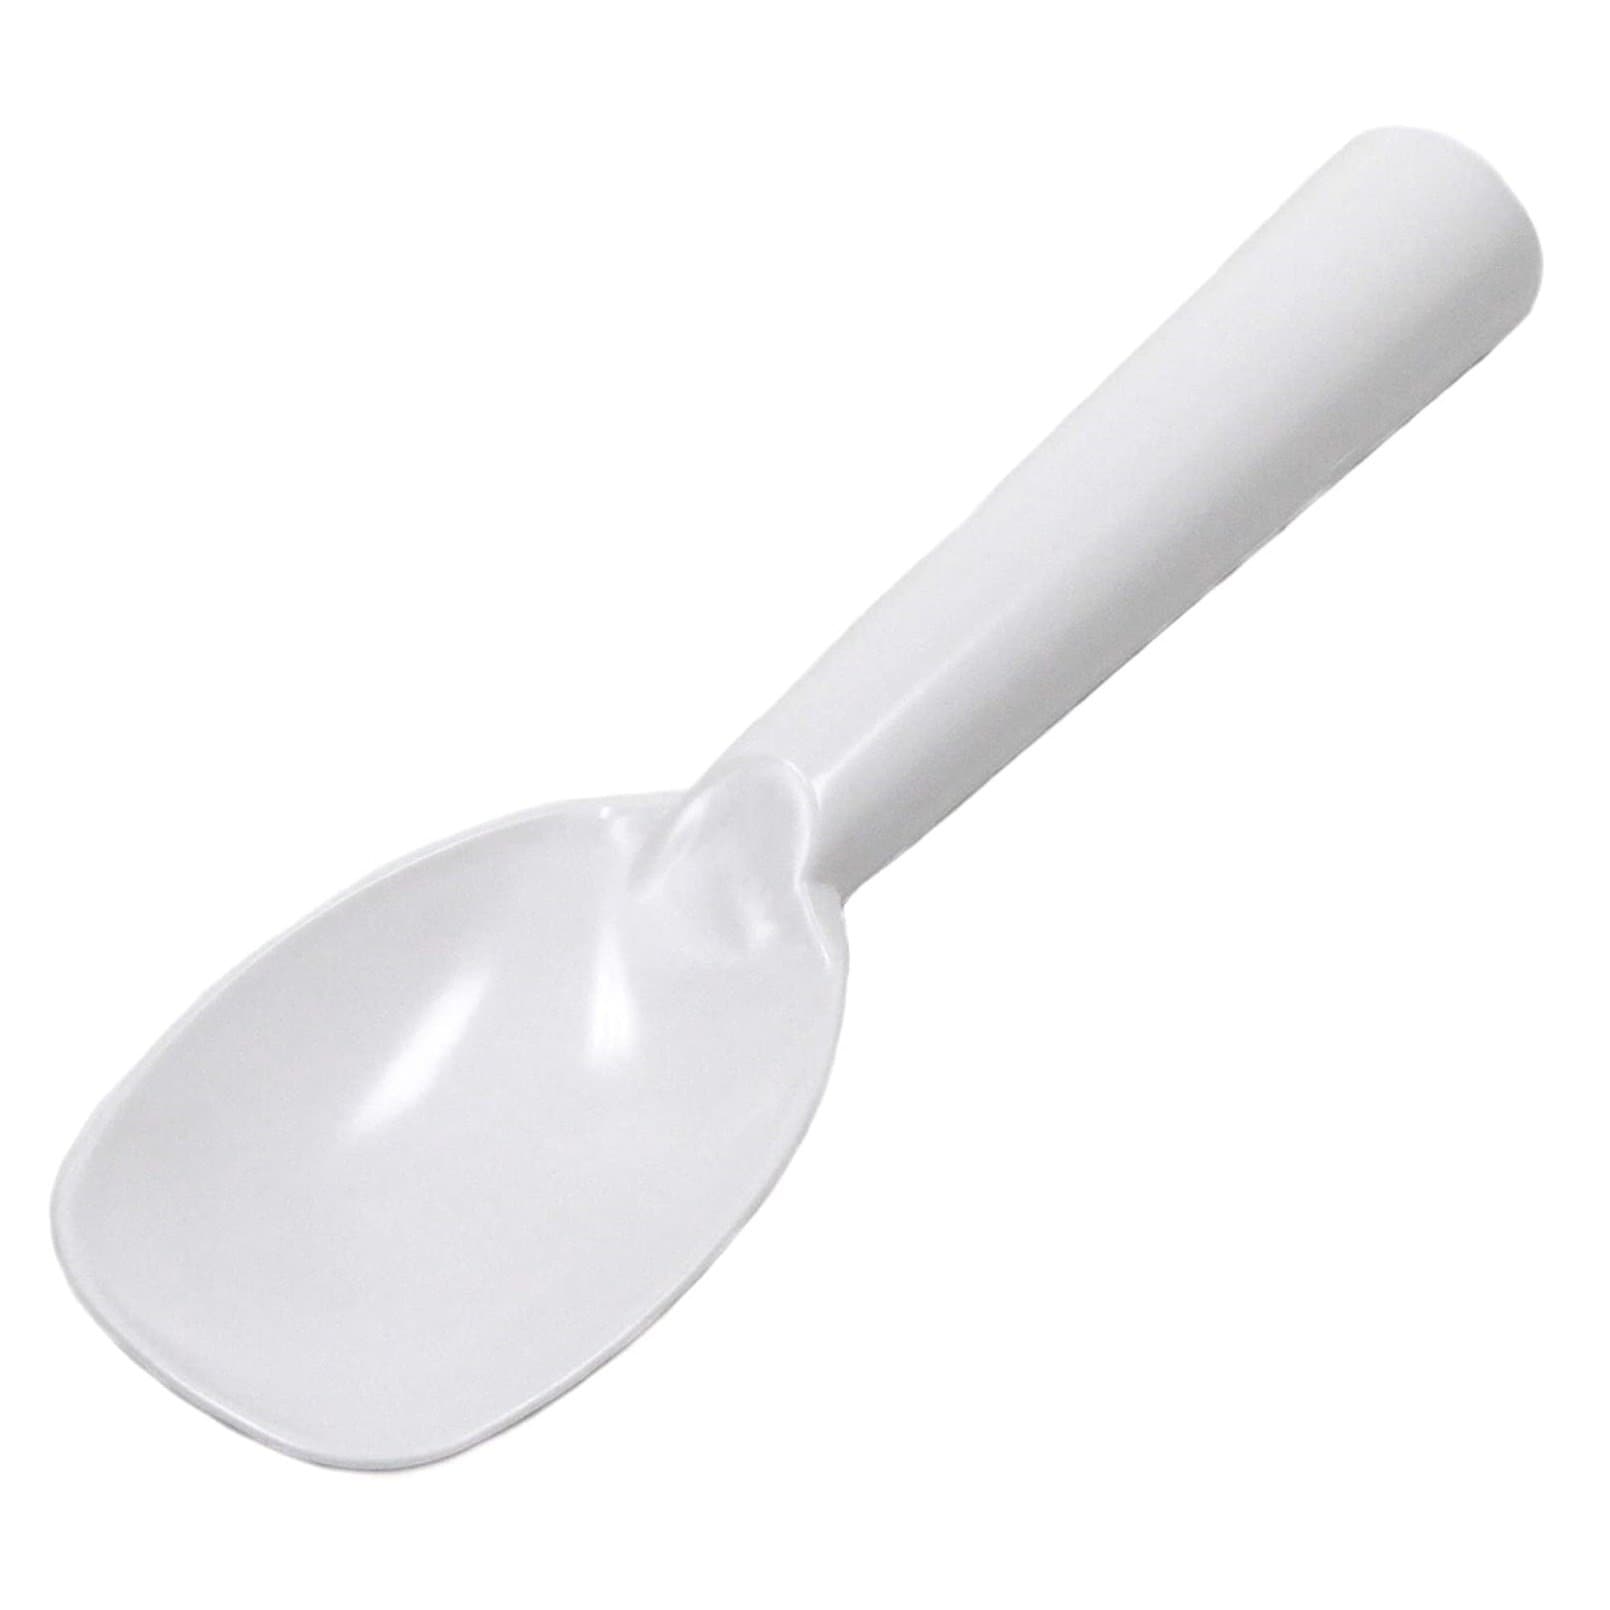 https://ak1.ostkcdn.com/images/products/is/images/direct/ac16d847c4dd1dfda36d22c2654766ca7fcb56ab/Chef-Craft-9%22-Ice-Cream-Spade---Plastic-Serving-Scoop-Paddle.jpg